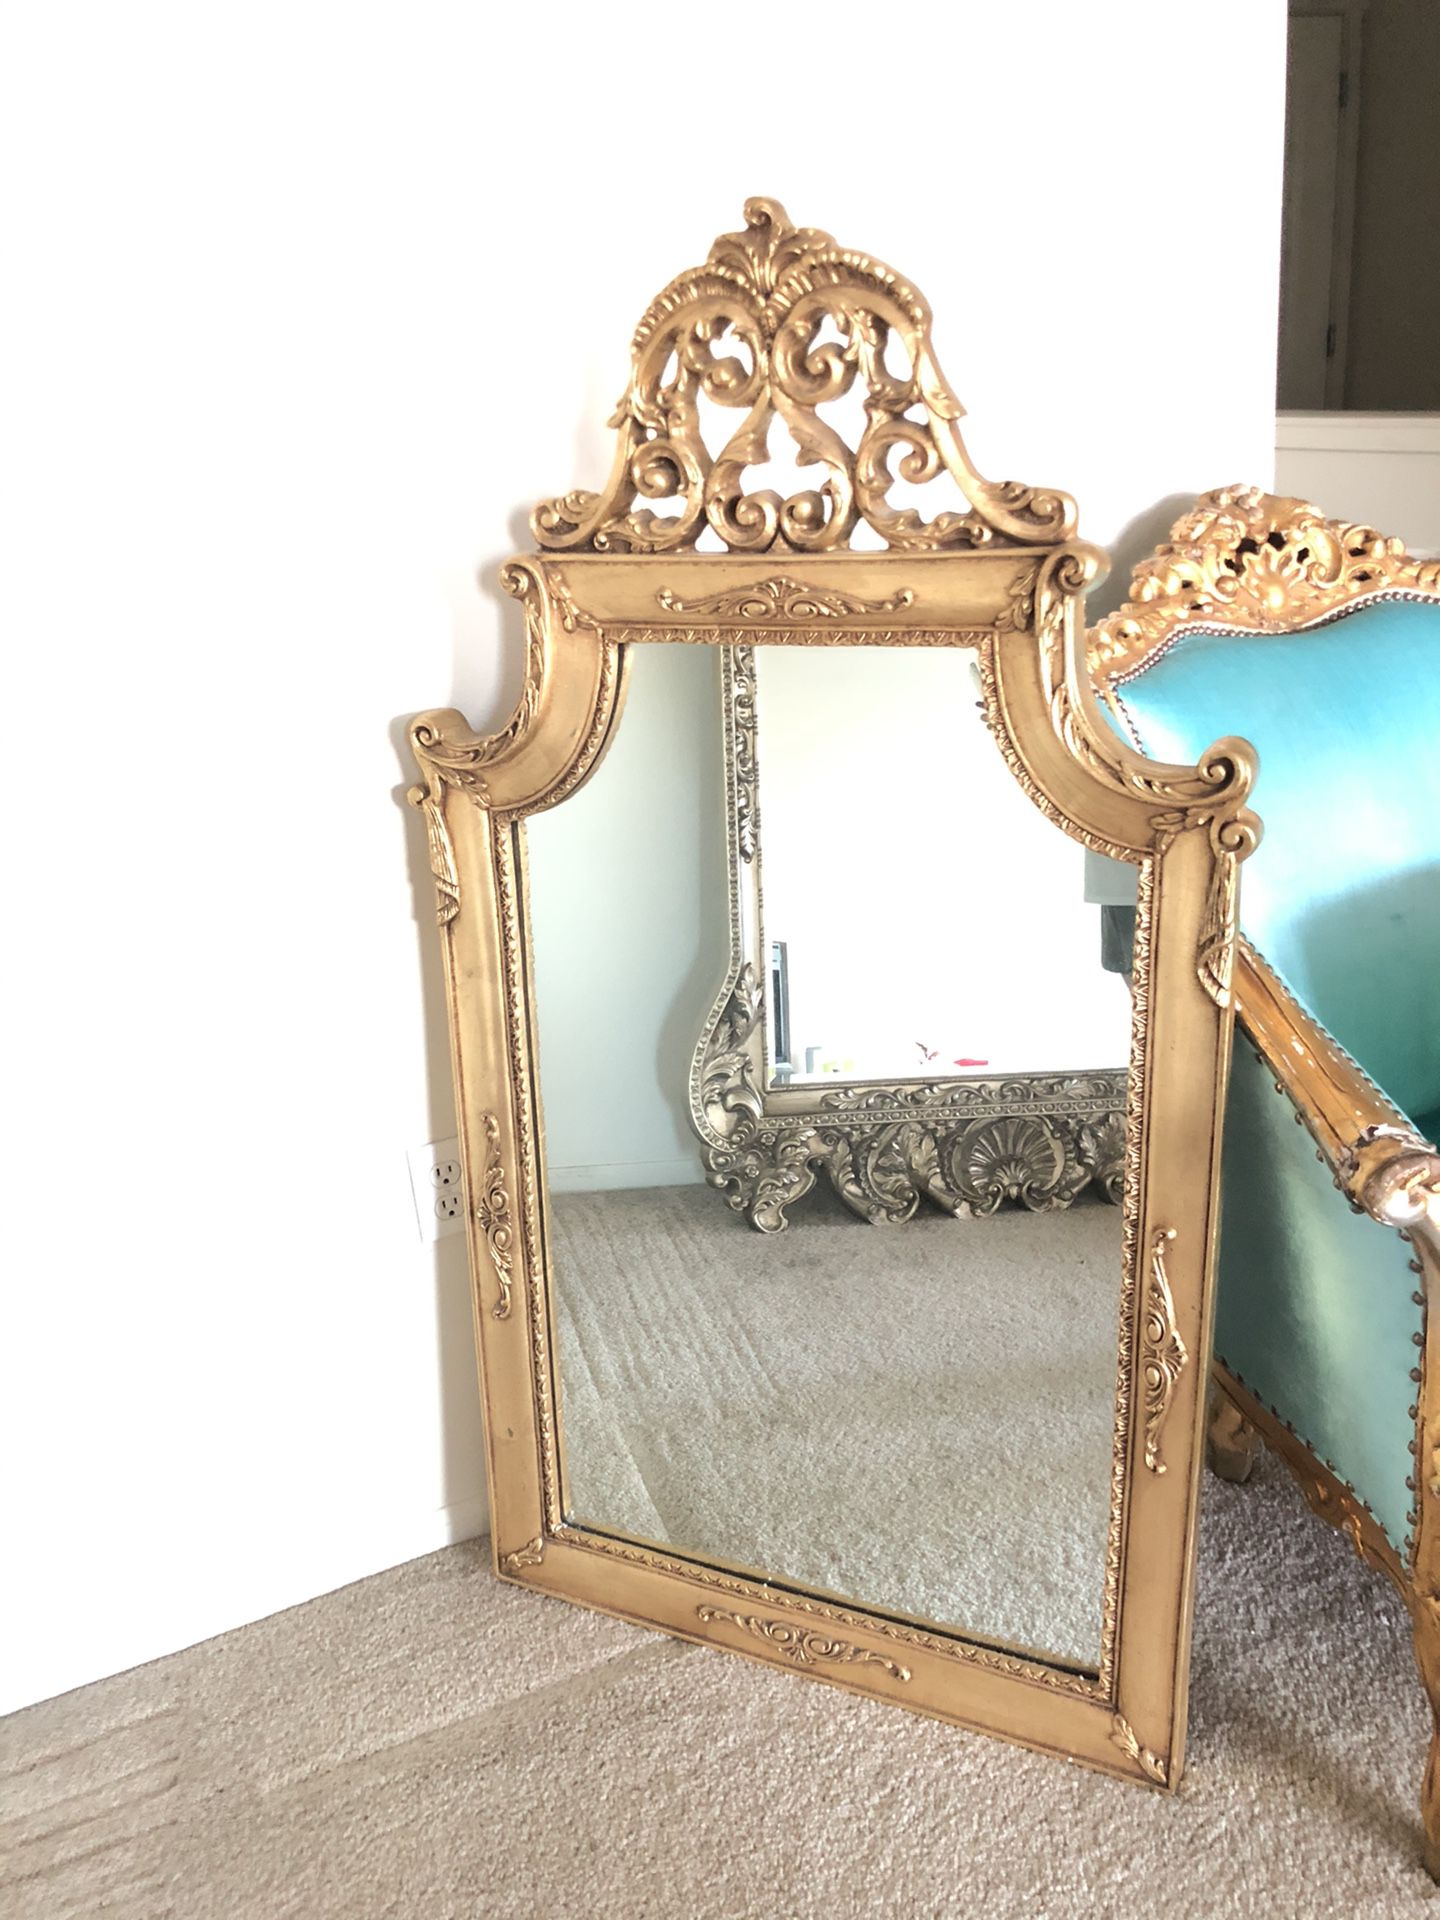 DIRECT SELL- ITALY Circa 1960’s GOLD ORNATE LEANING ENTRY MIRROR ESTATE PIECE